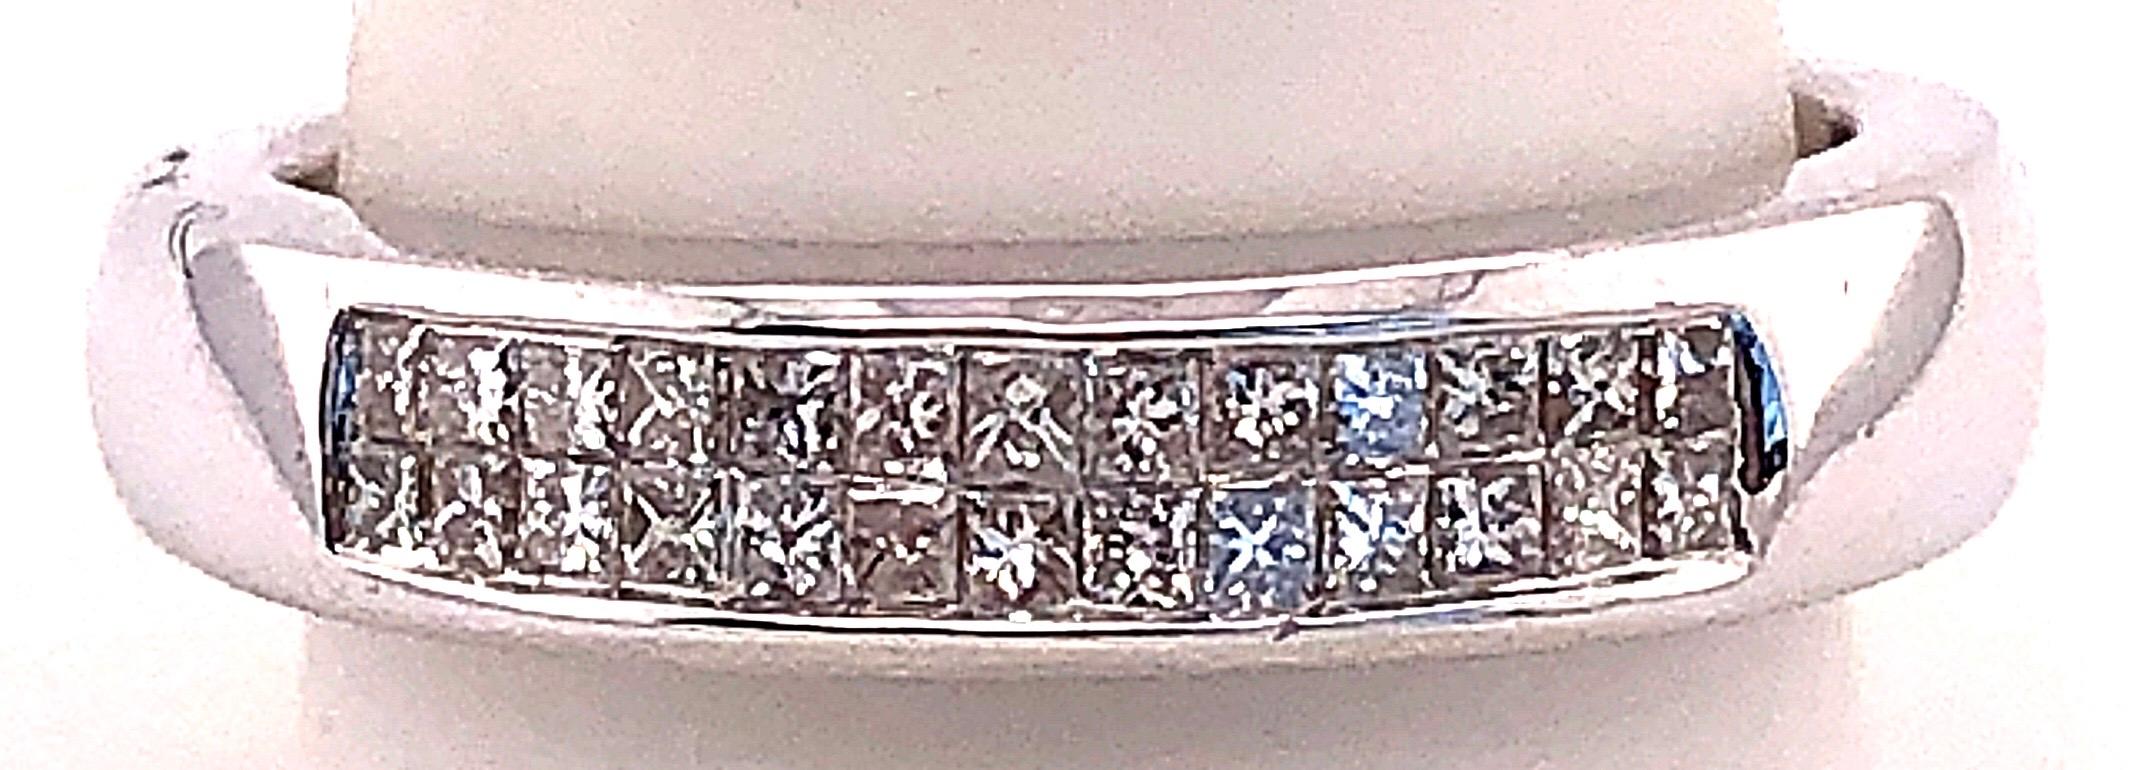 14 Karat White Gold Fashion Ring with Diamonds Size 9.75.
1.00 total diamond weight.
8.29 grams total weight.
4.98 ring height.